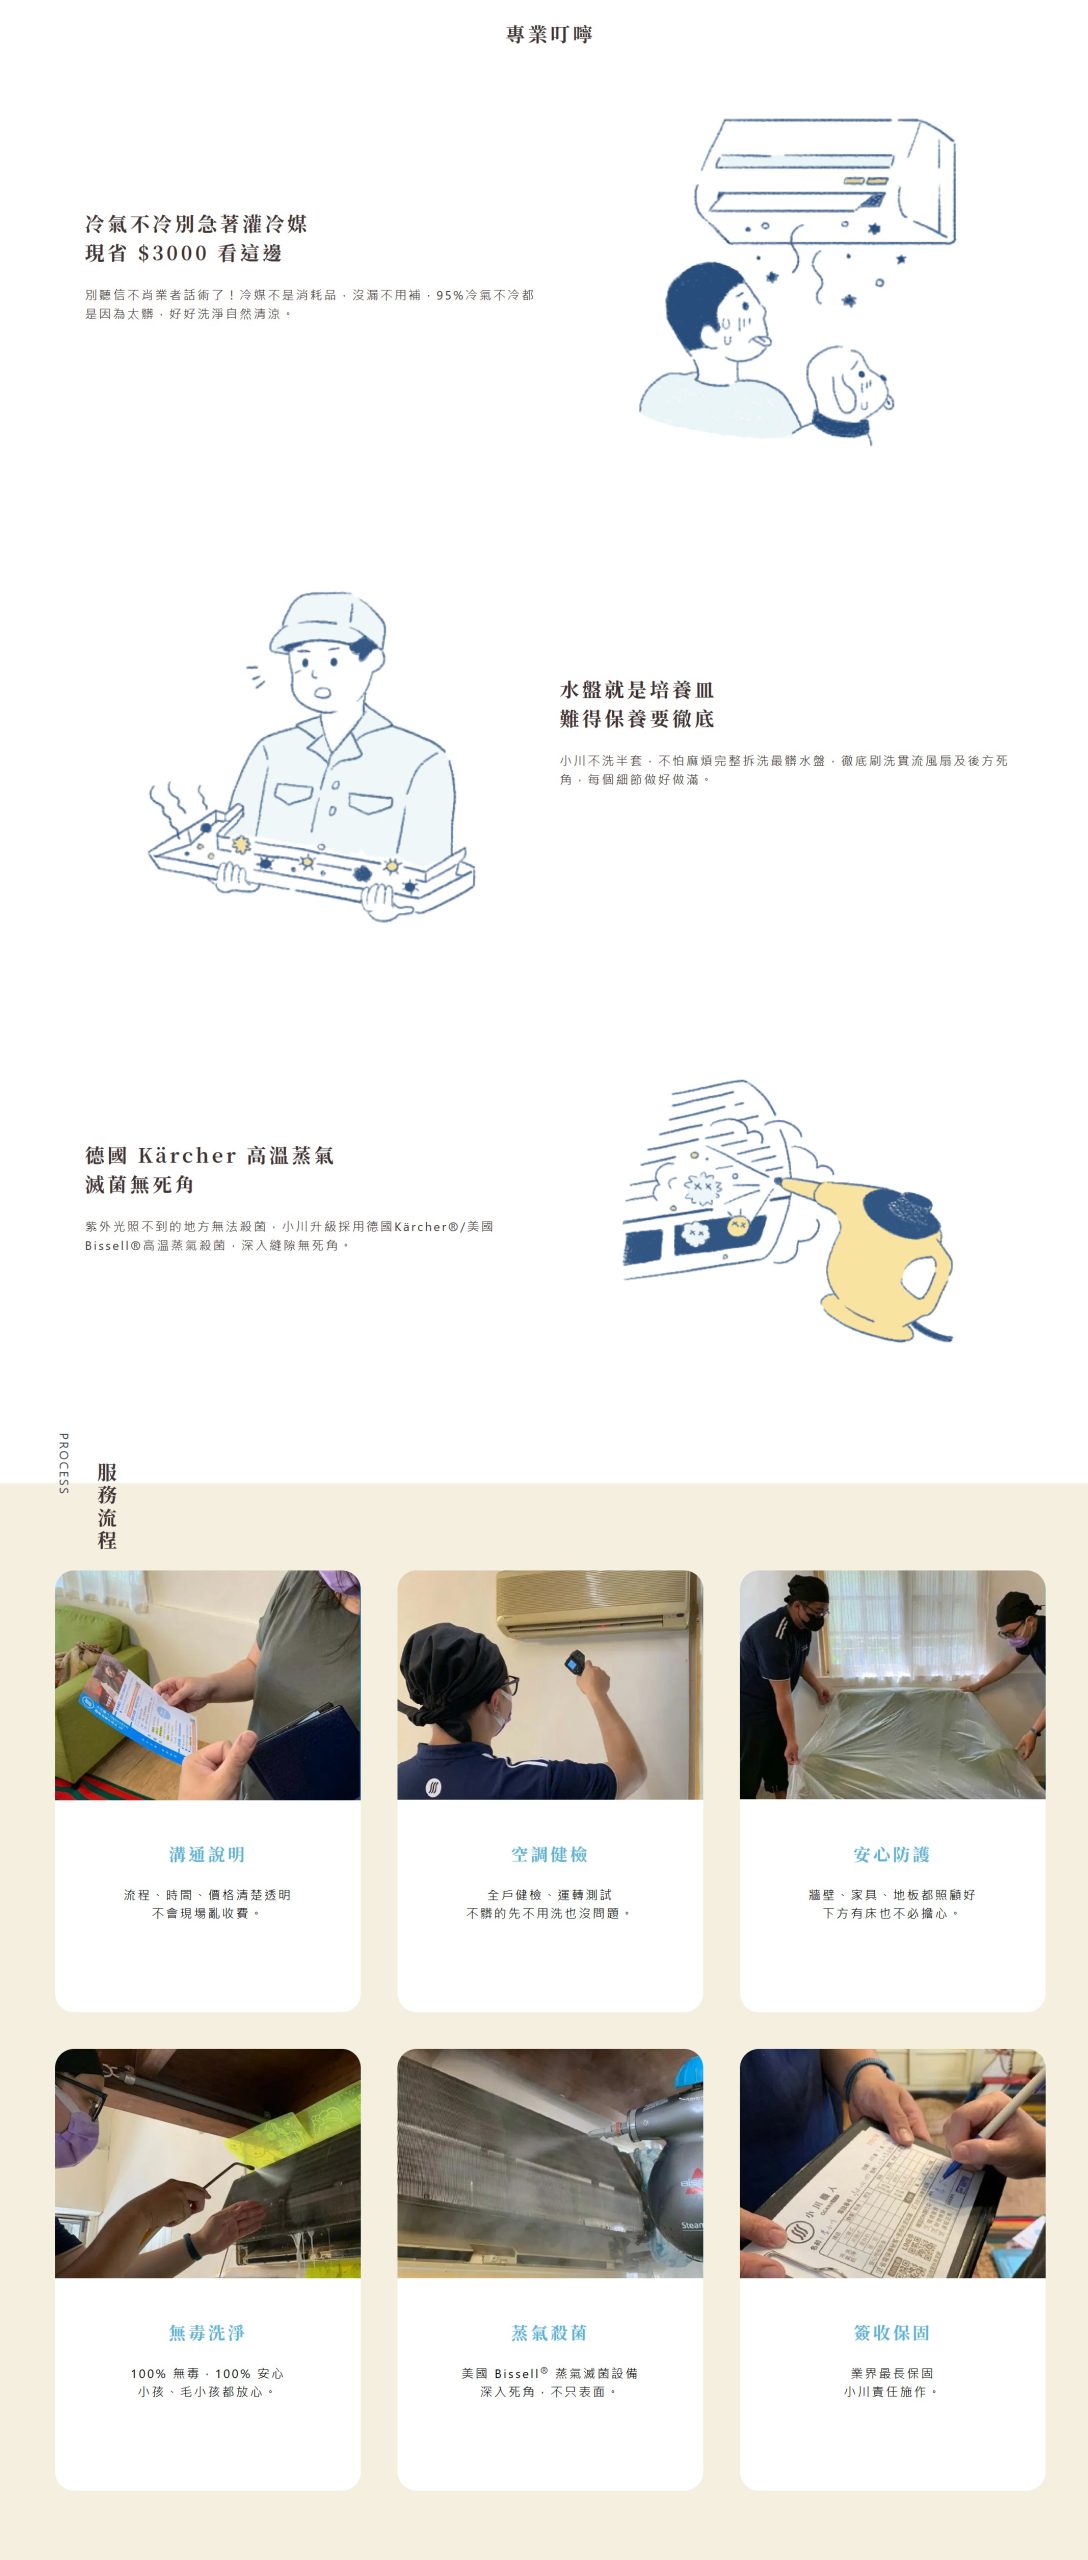 Ogawa ECO - Main services (Non-toxic Aircon Cleaning) - Integrated design for image and photo text arrangement - Desktop